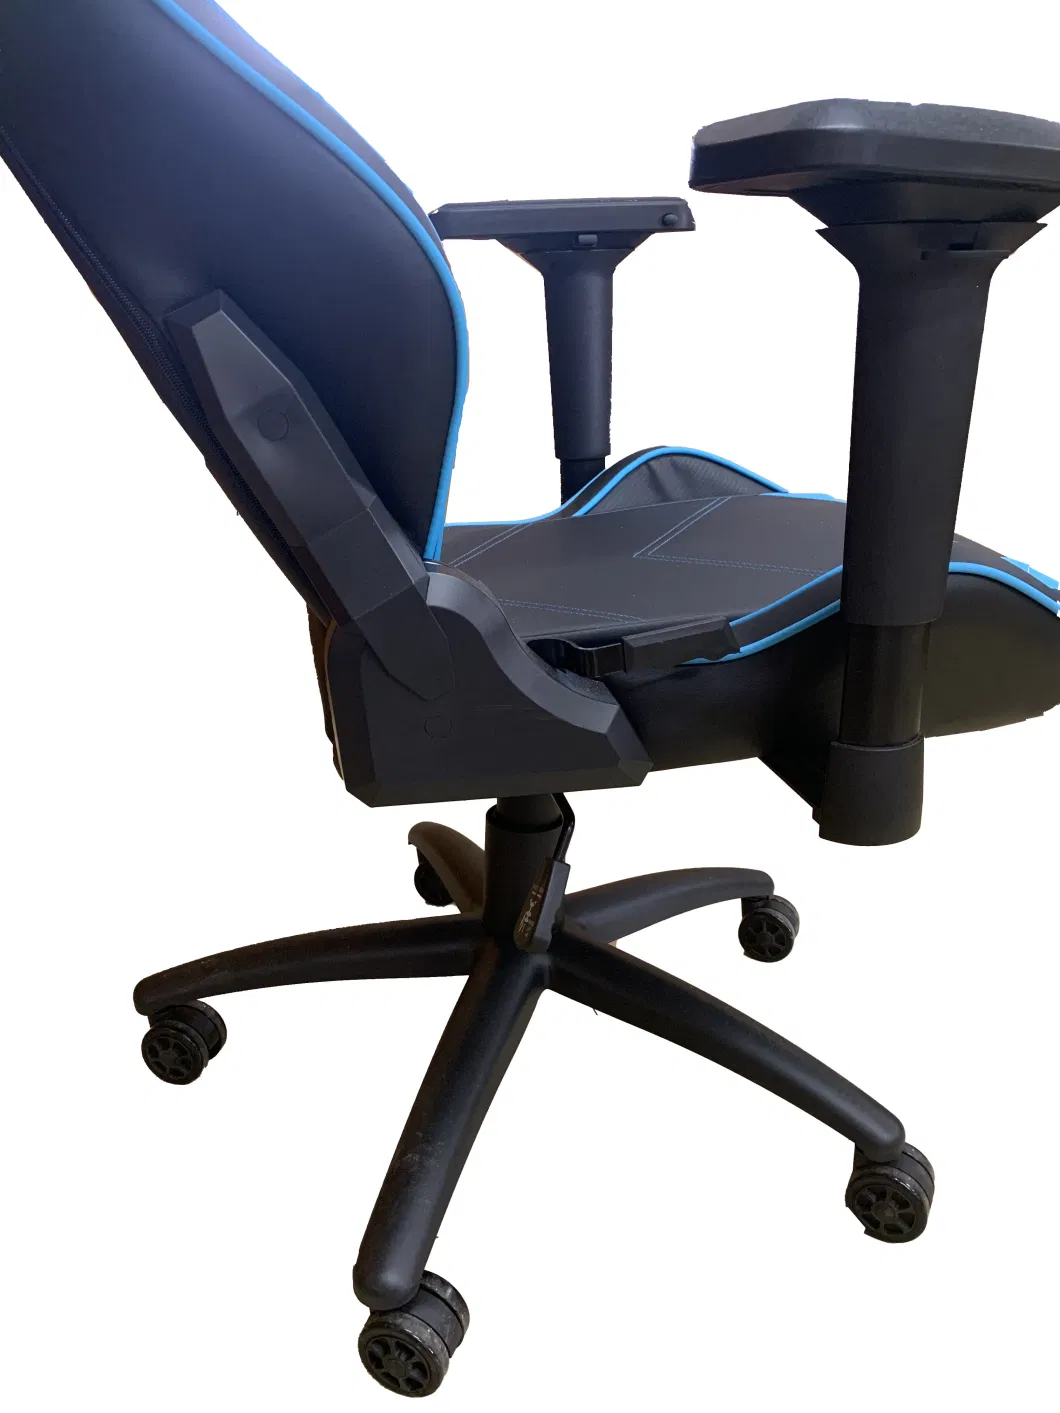 Low Price Racer Sport Gaming Chair with PU Leather for Office, Game